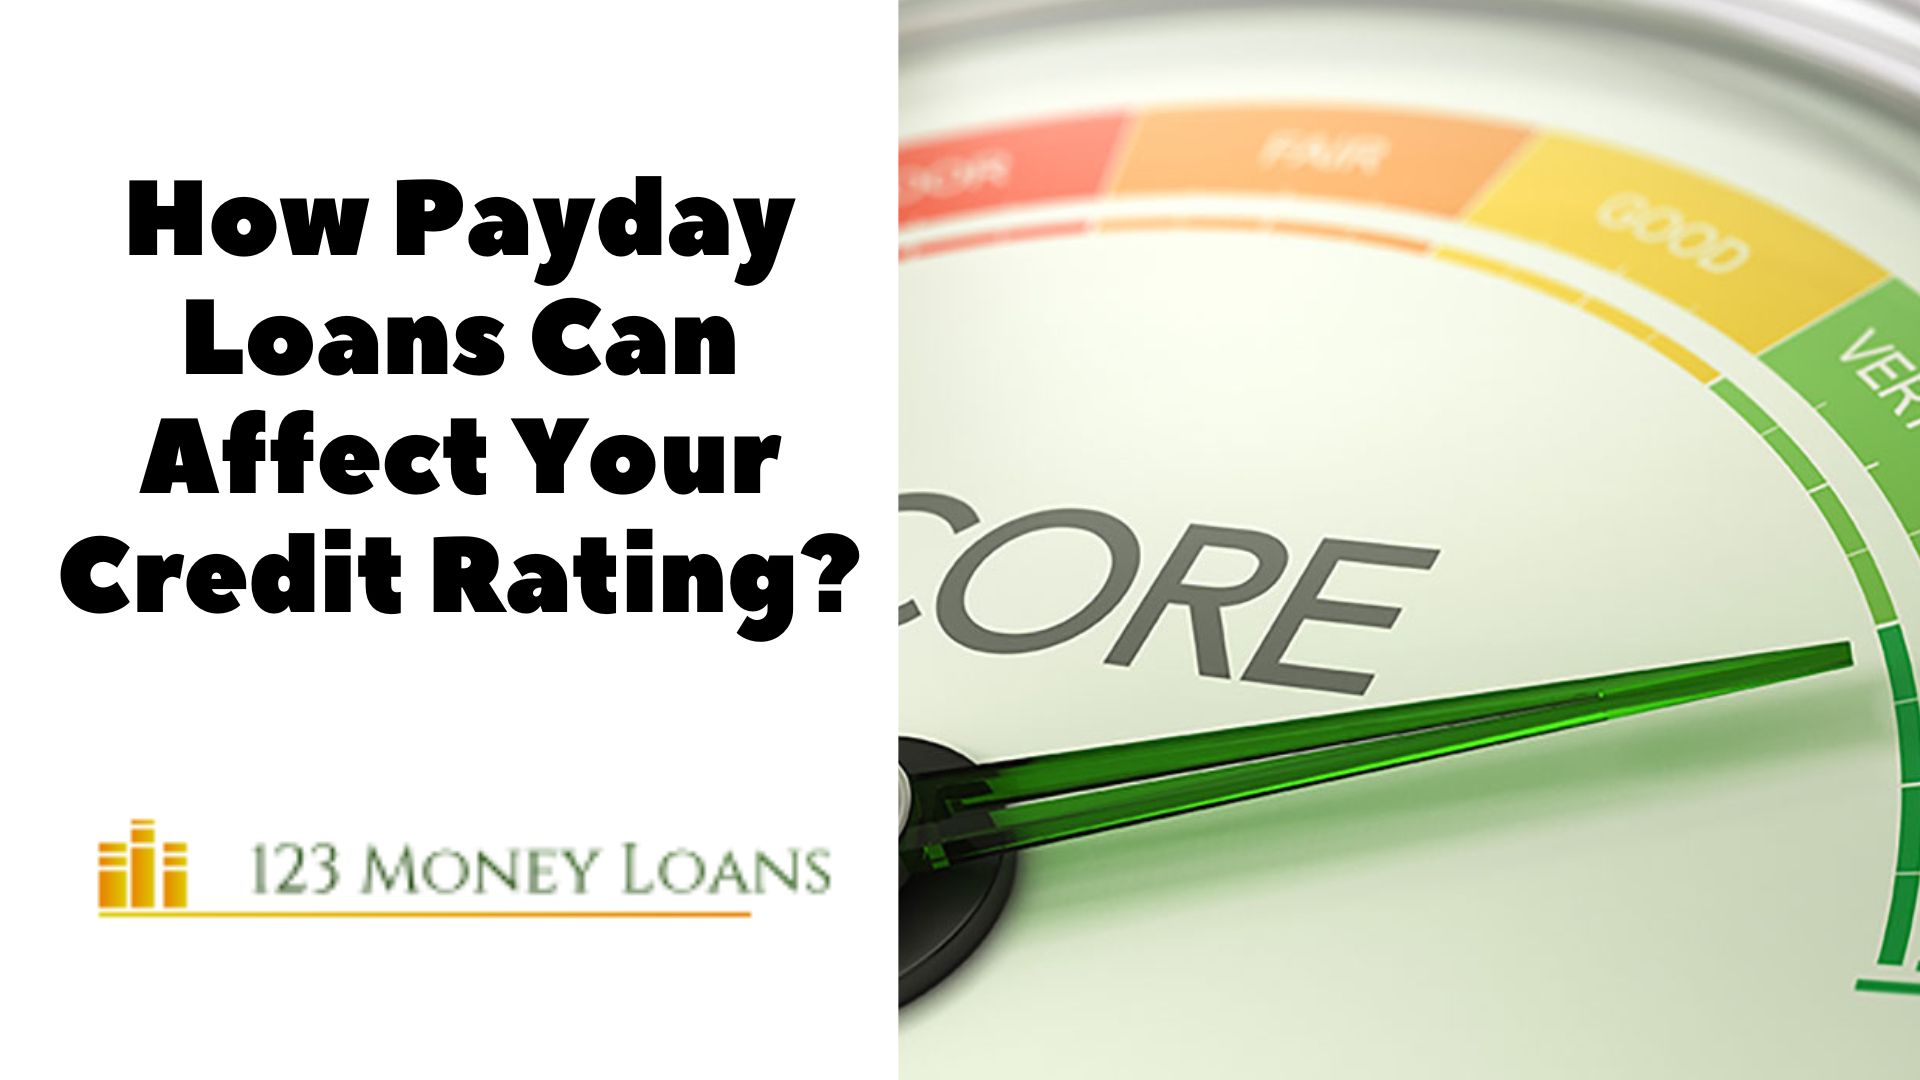 How Payday Loans Can Affect Your Credit Rating